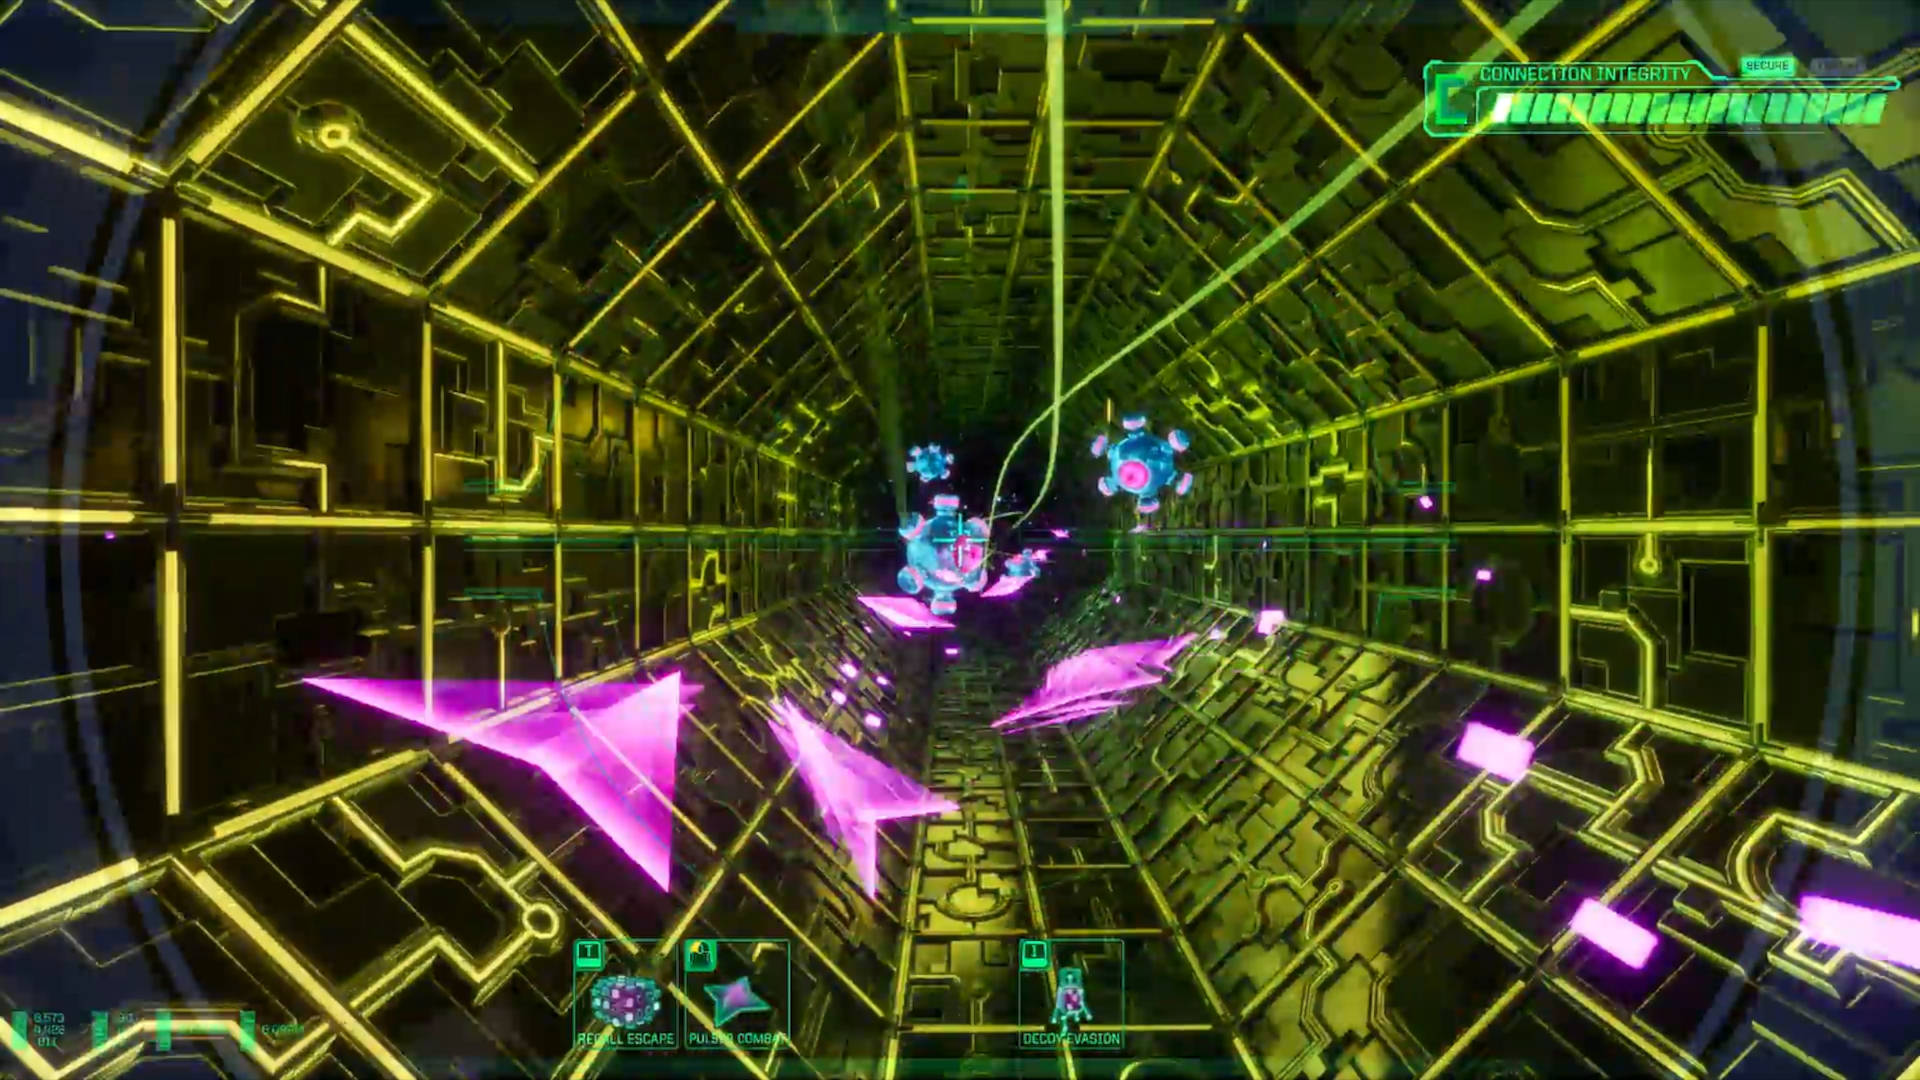 System Shock review - a view of Cyberspace. The Hacker is shooting at digital mines.